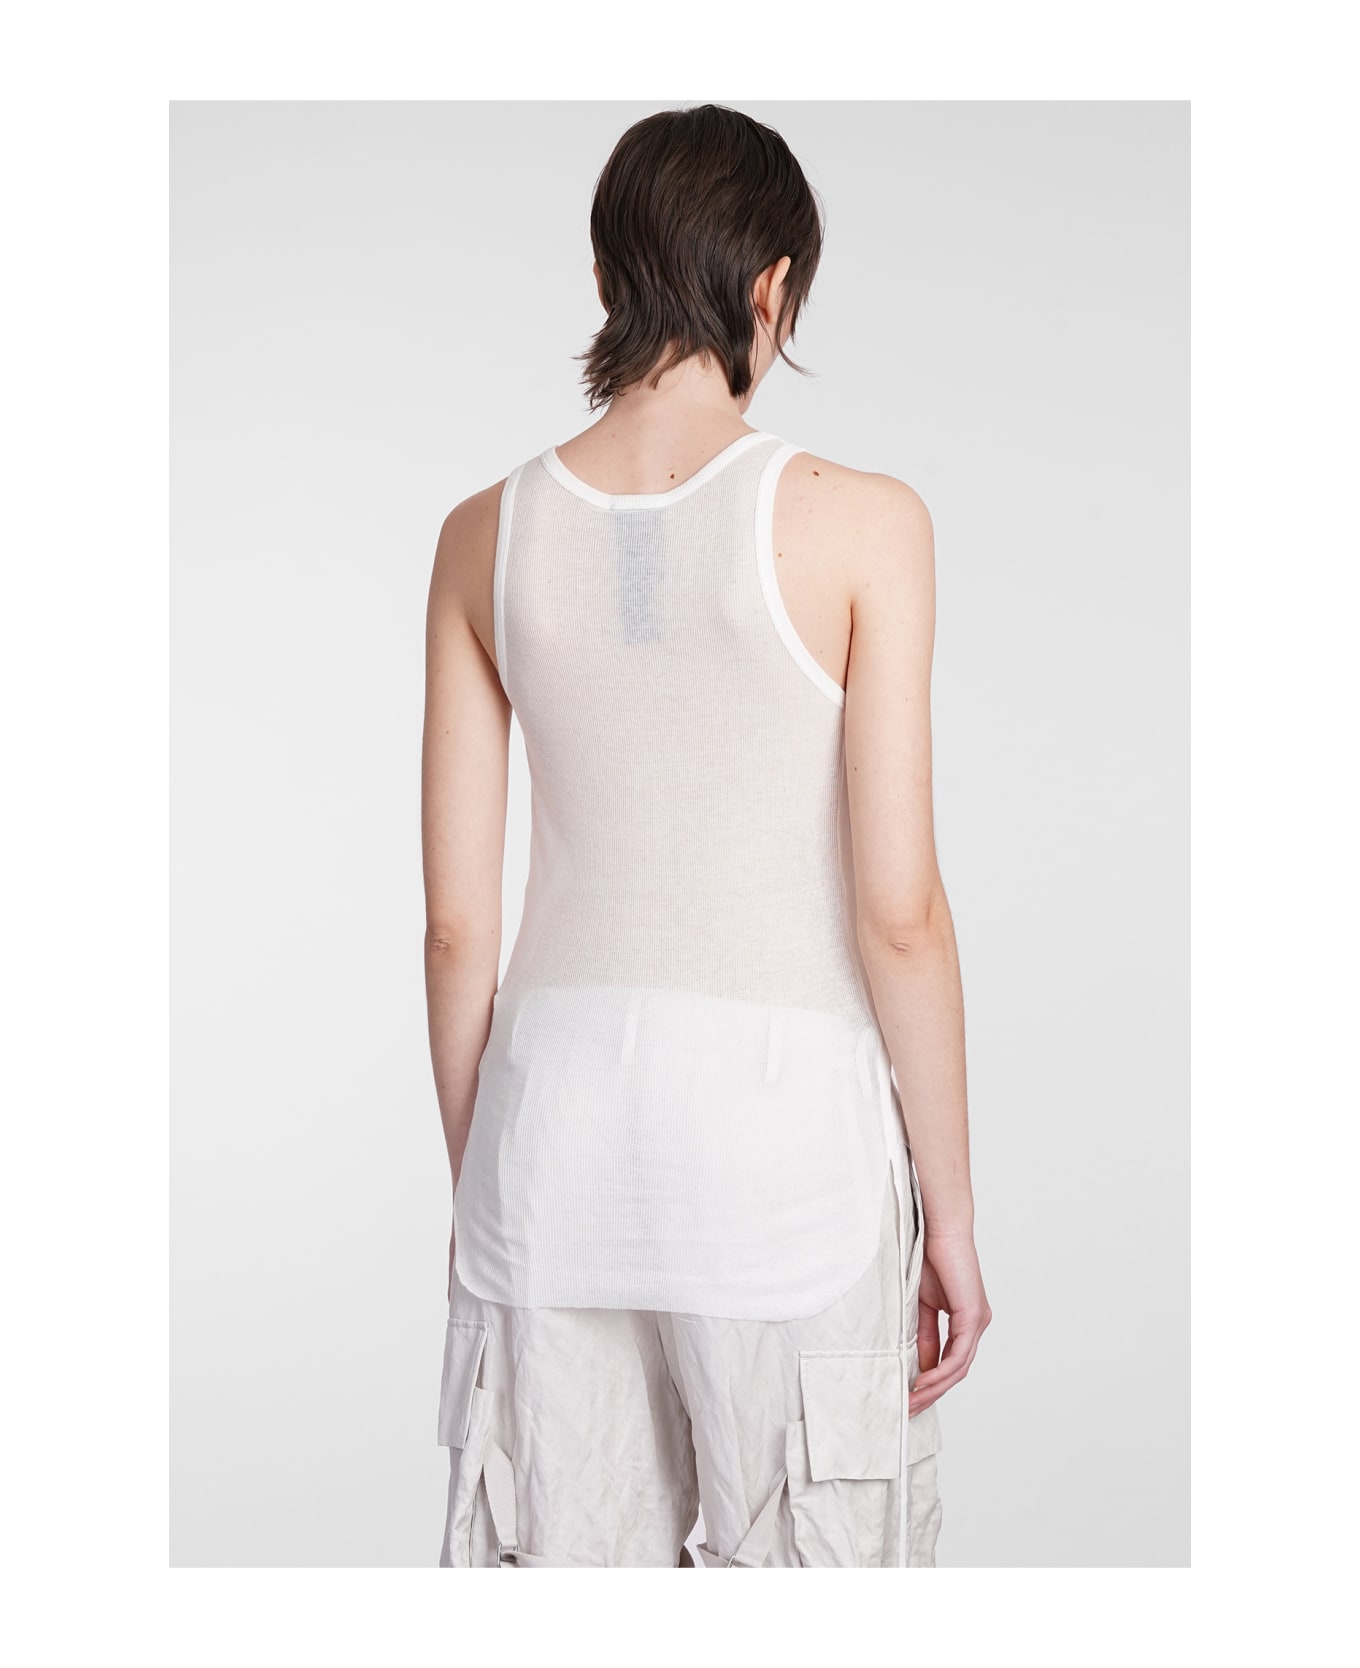 Ann Demeulemeester Tank Top In White Cotton - white